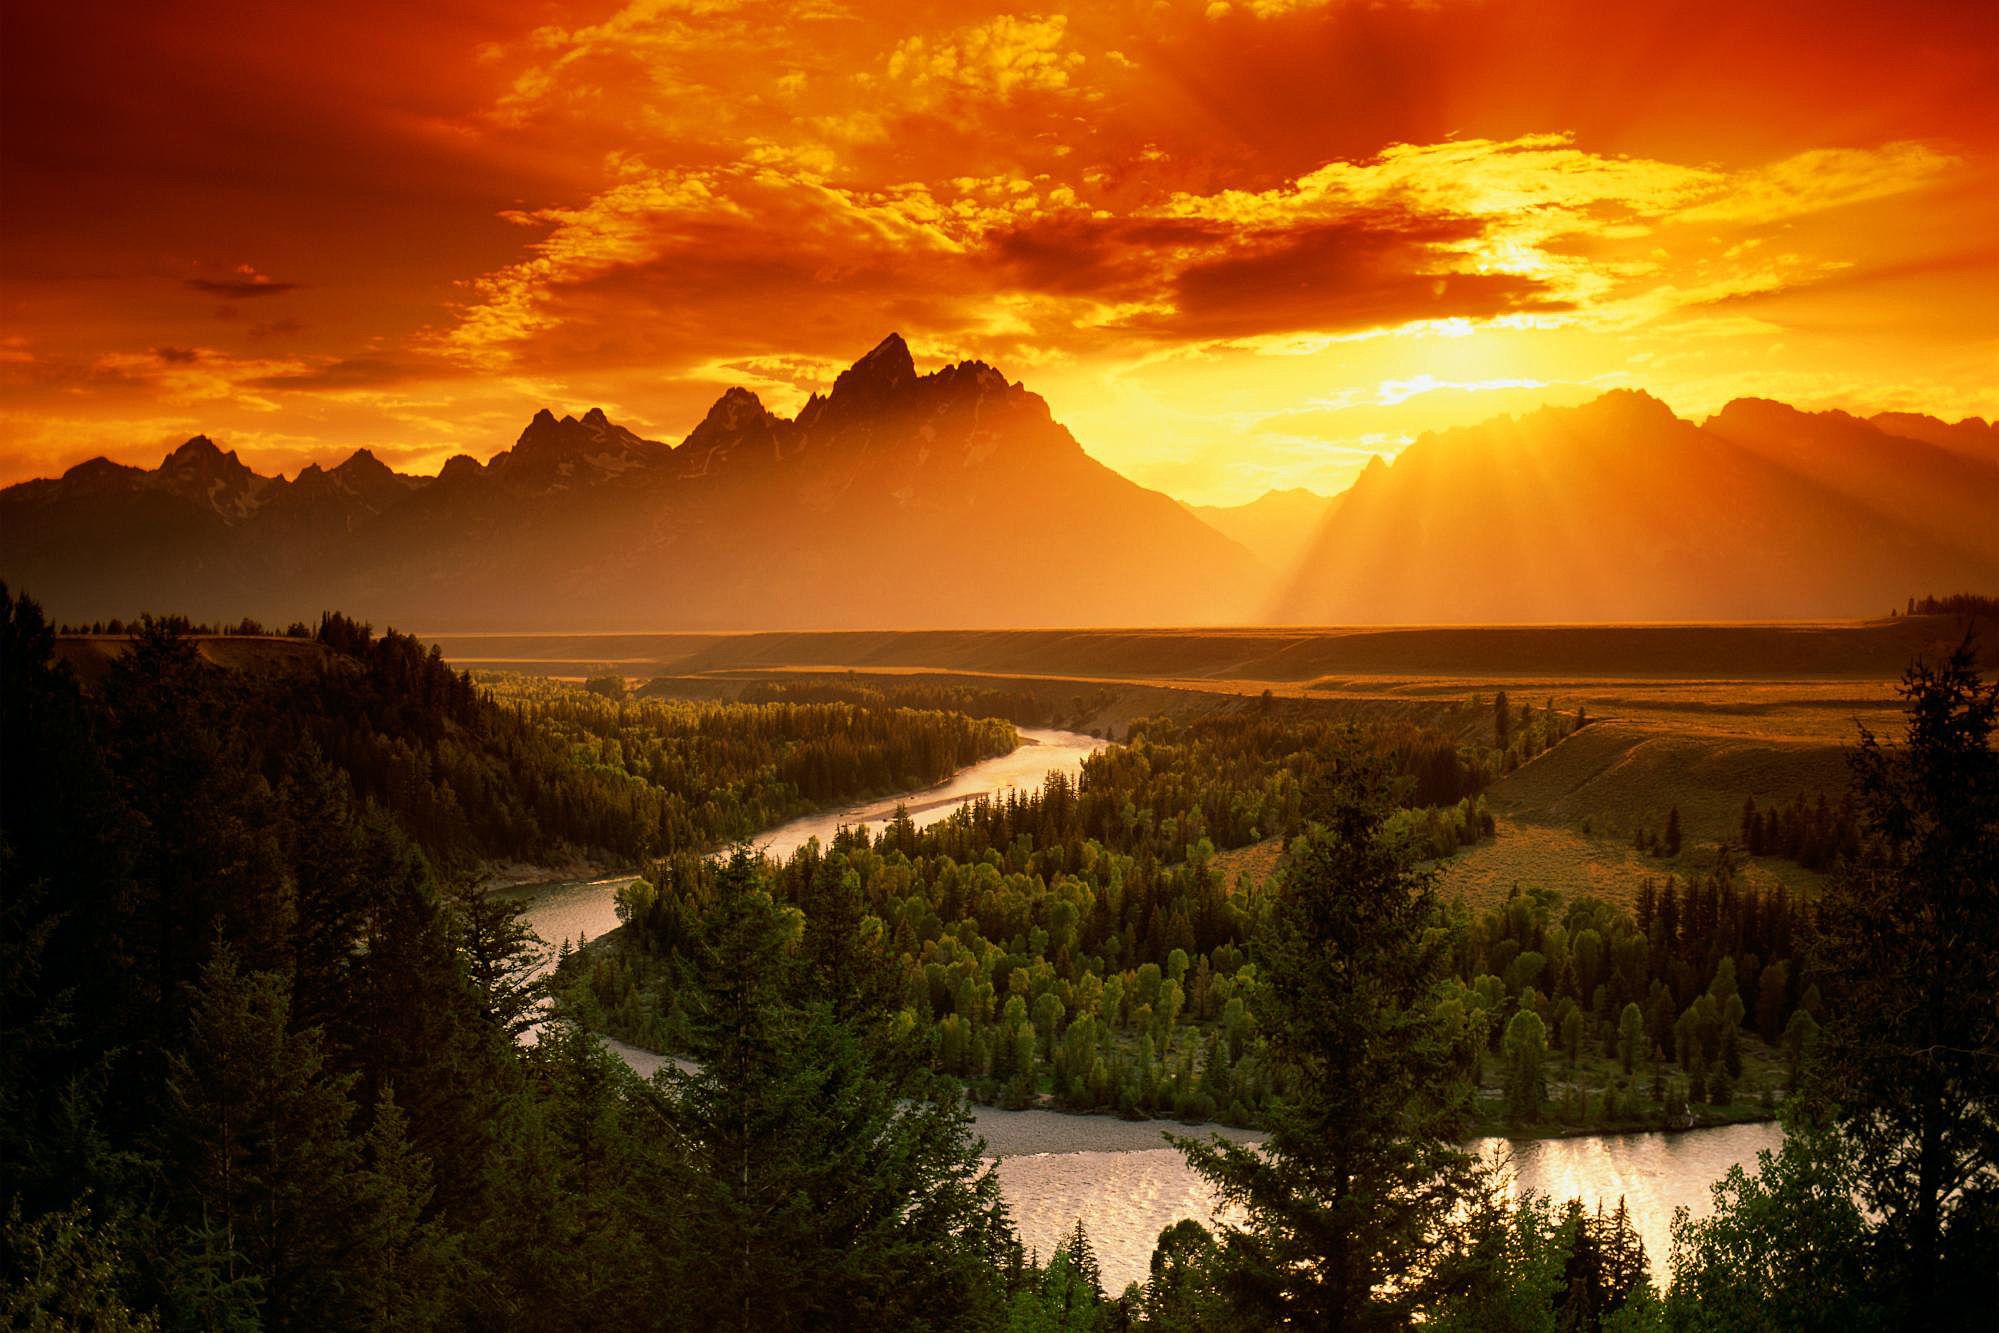 Wallpaper. Nature. photo. picture. river, sunset, mountains, trees